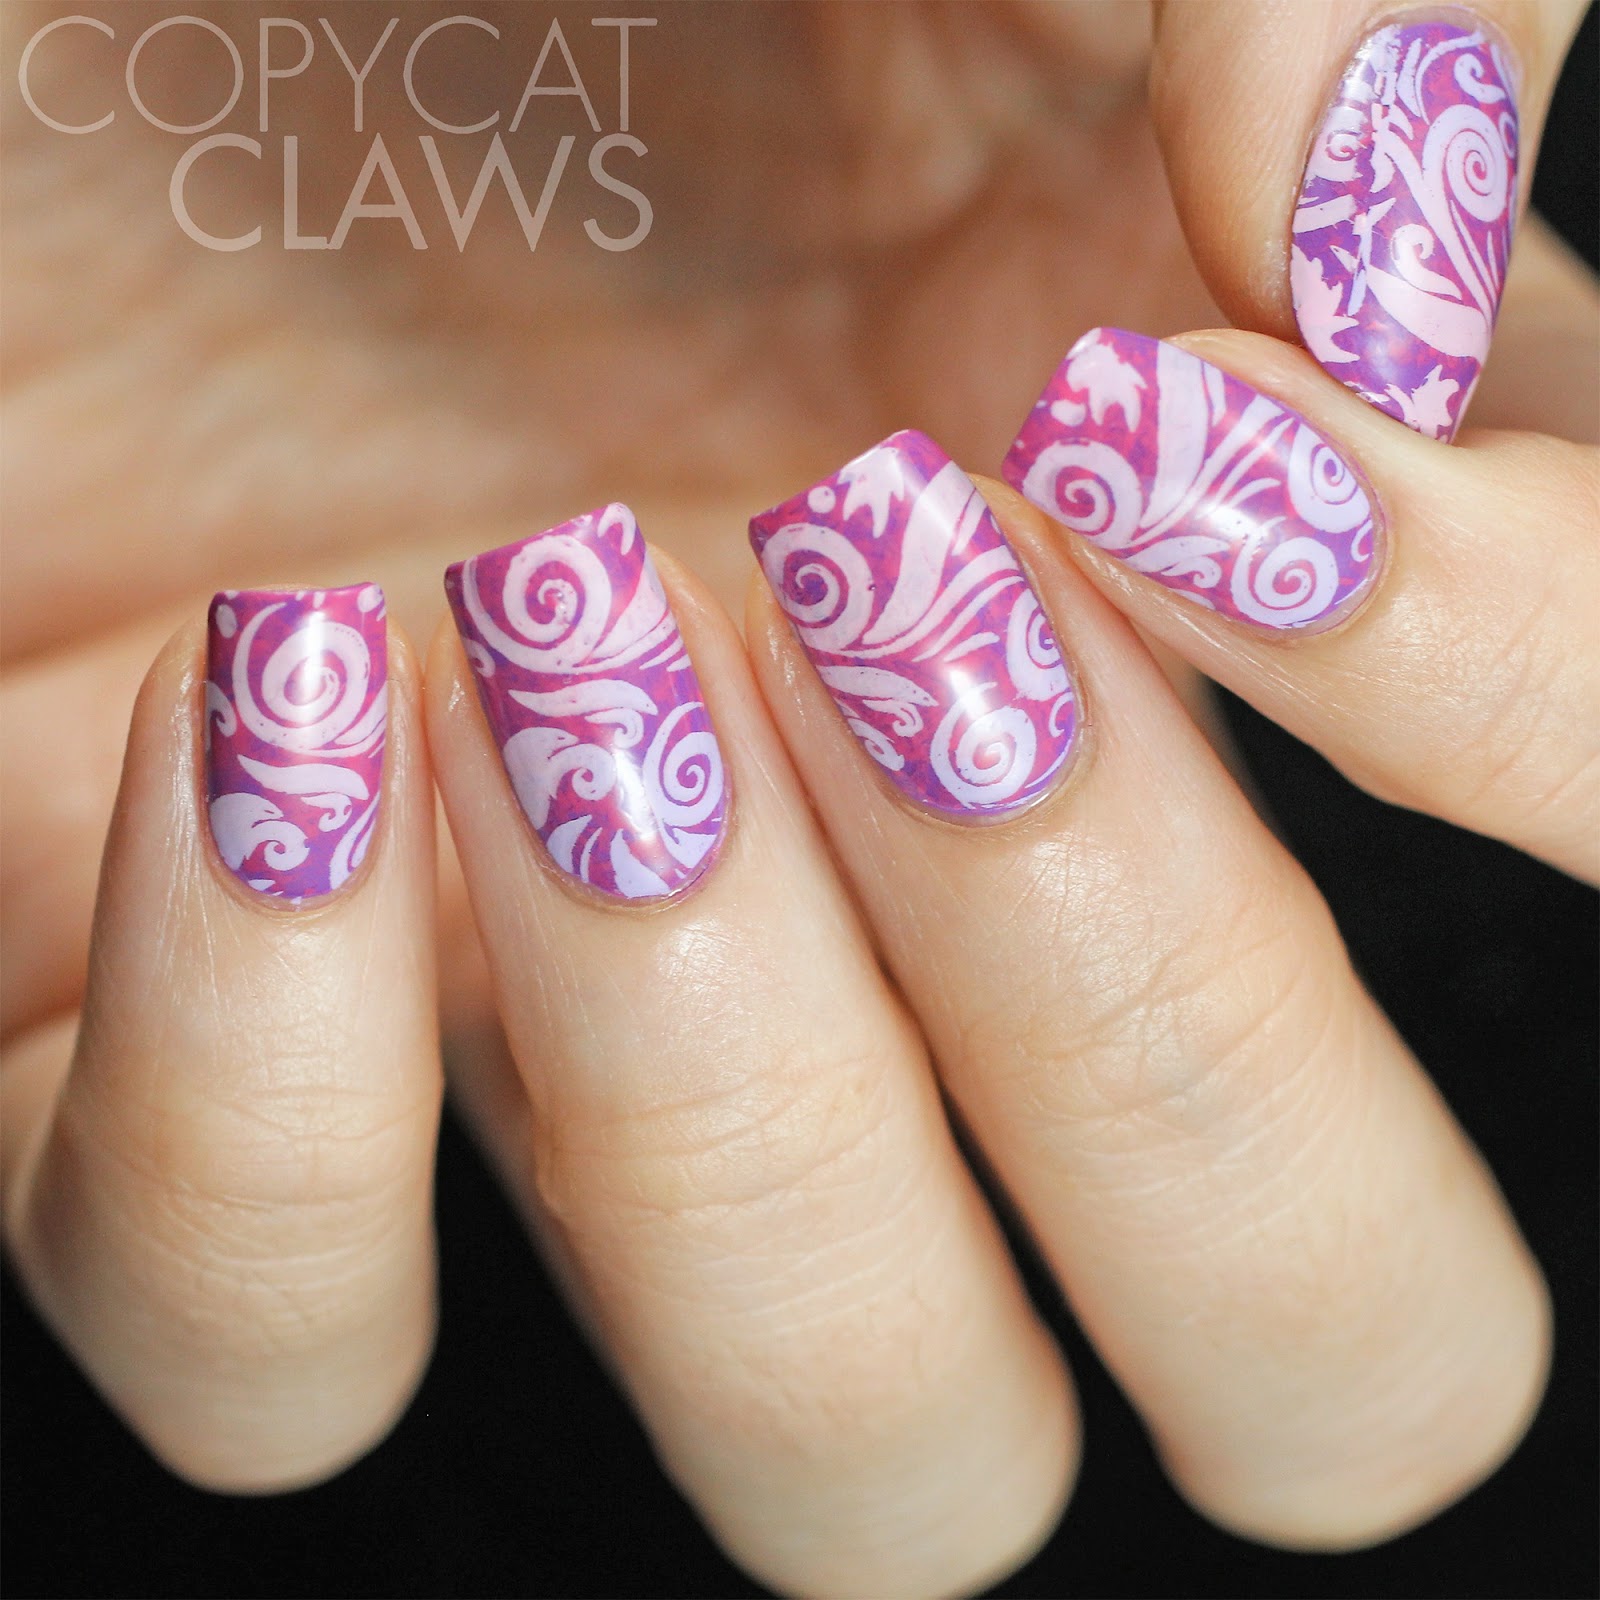 Copycat Claws: The Digital Dozen does Gradient+ and 40 Great Nail Art ...